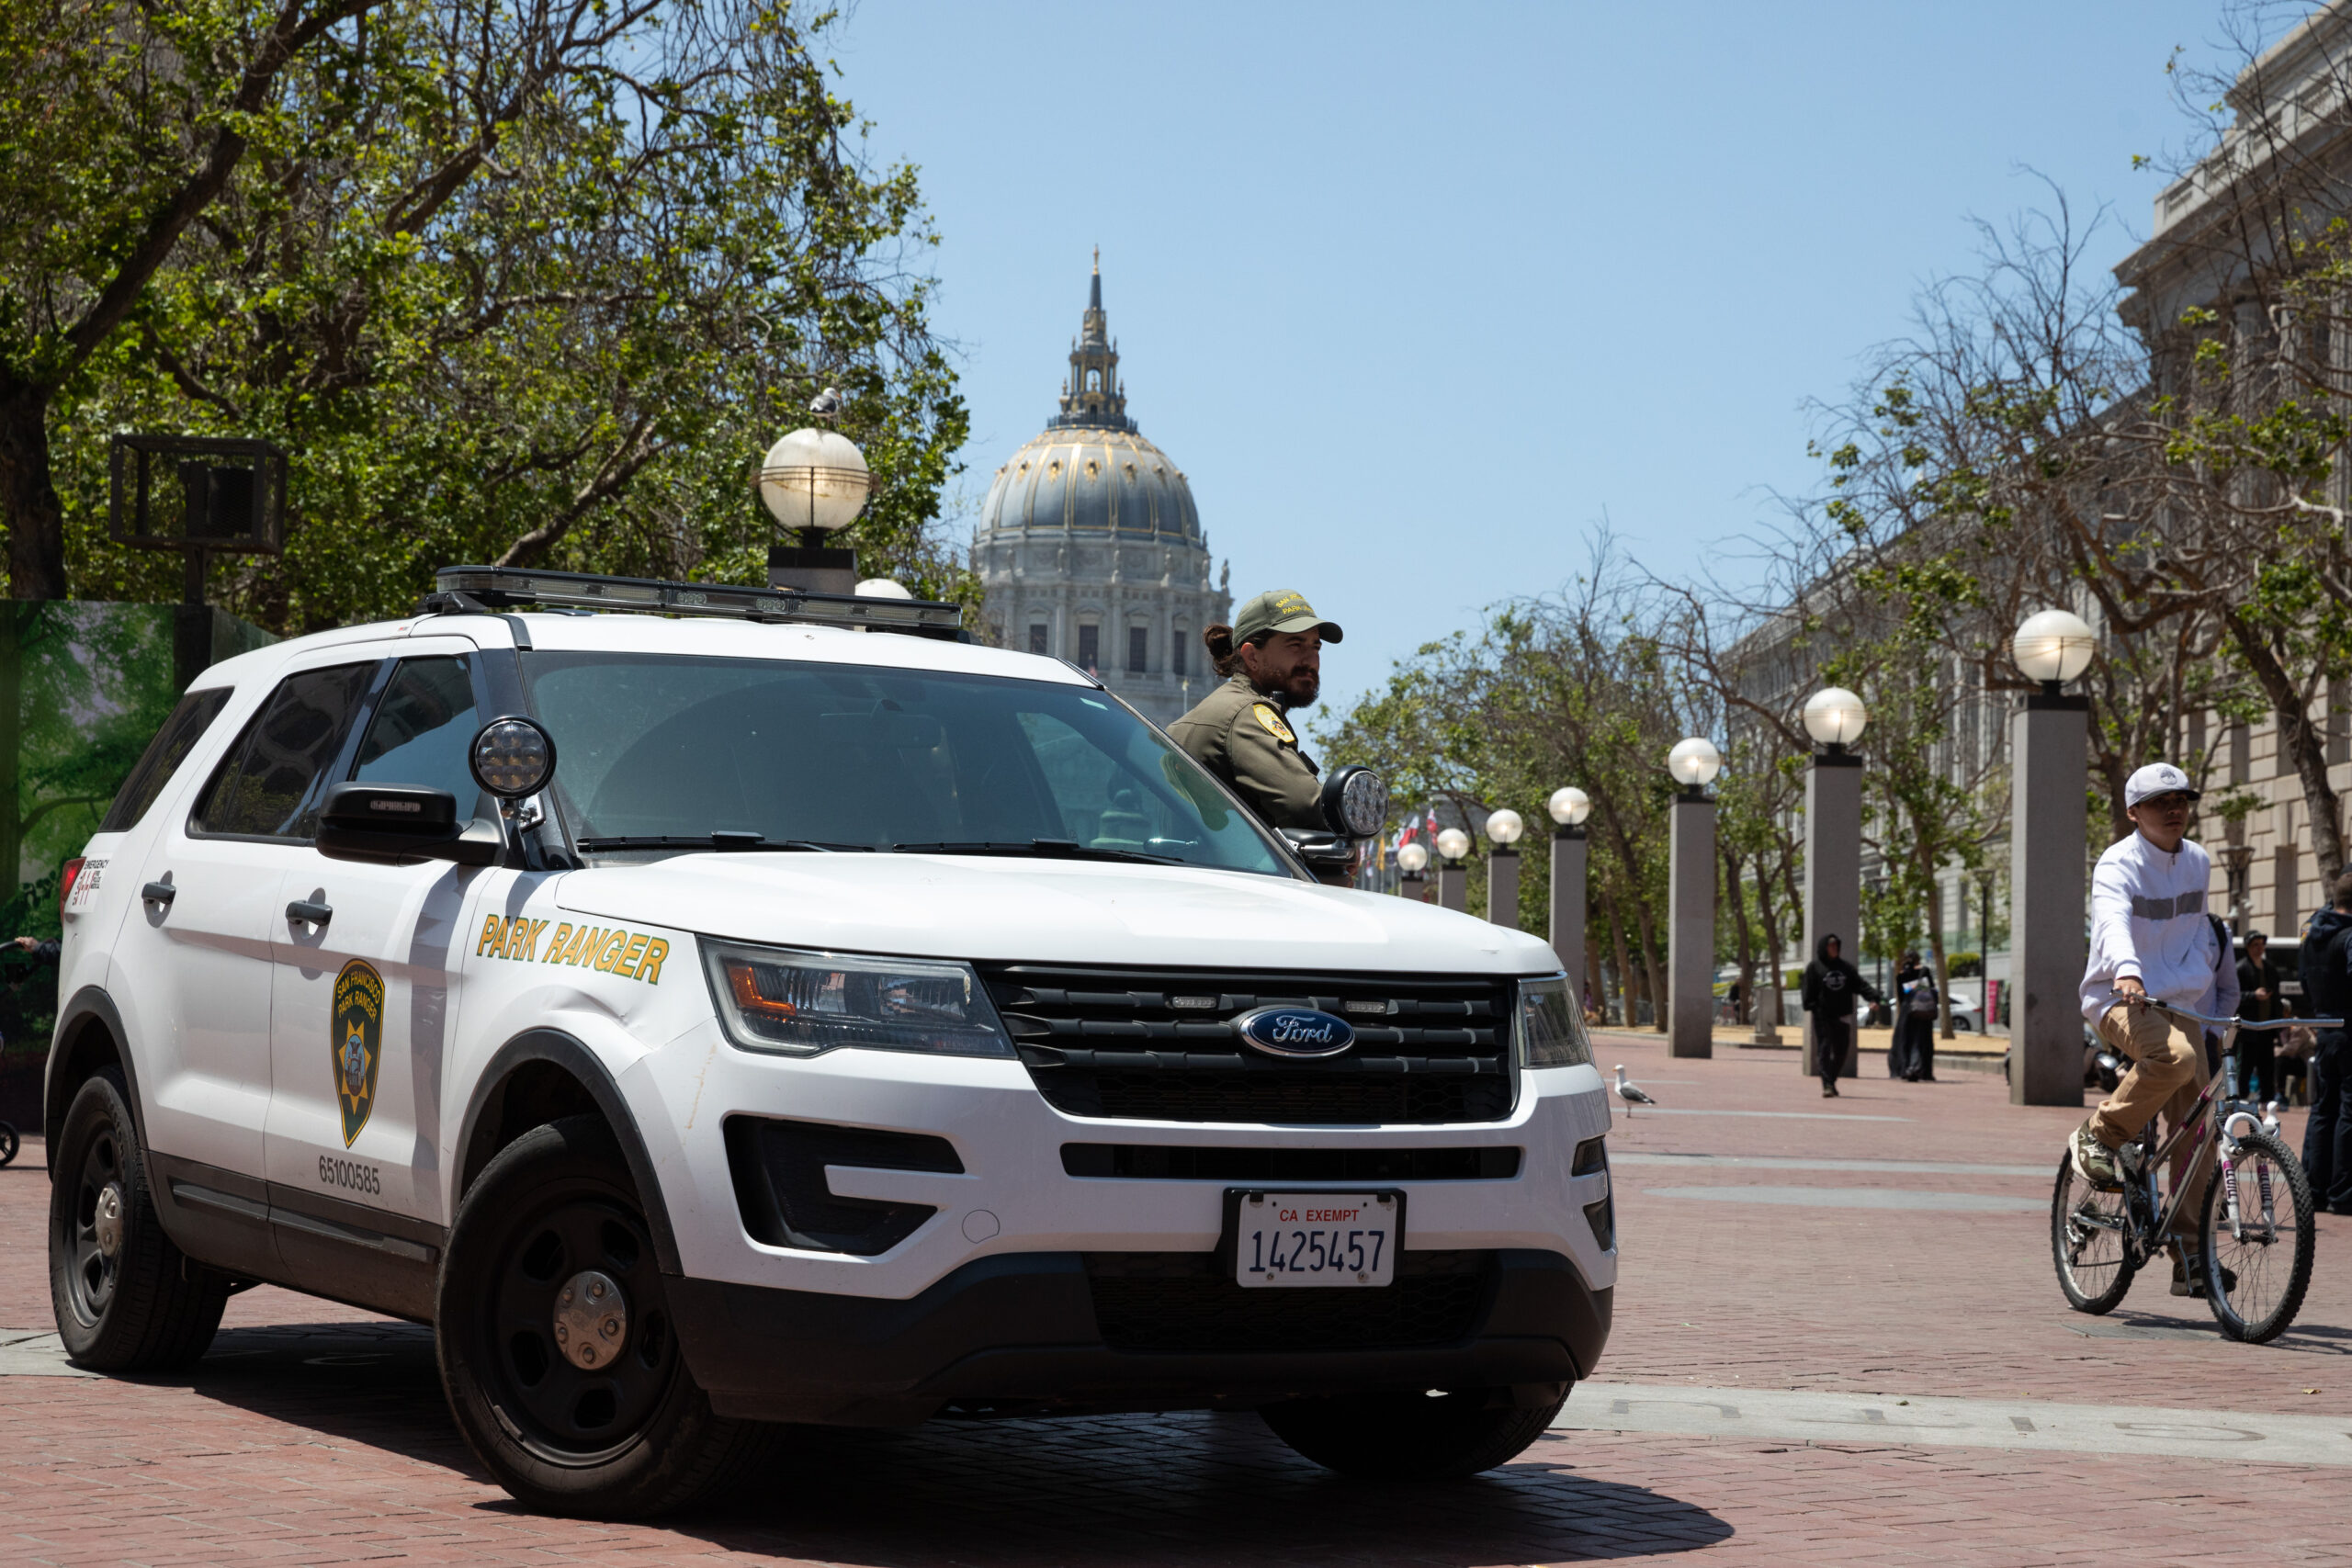 A Sheriff's Department vehicle in United Nations plaza.